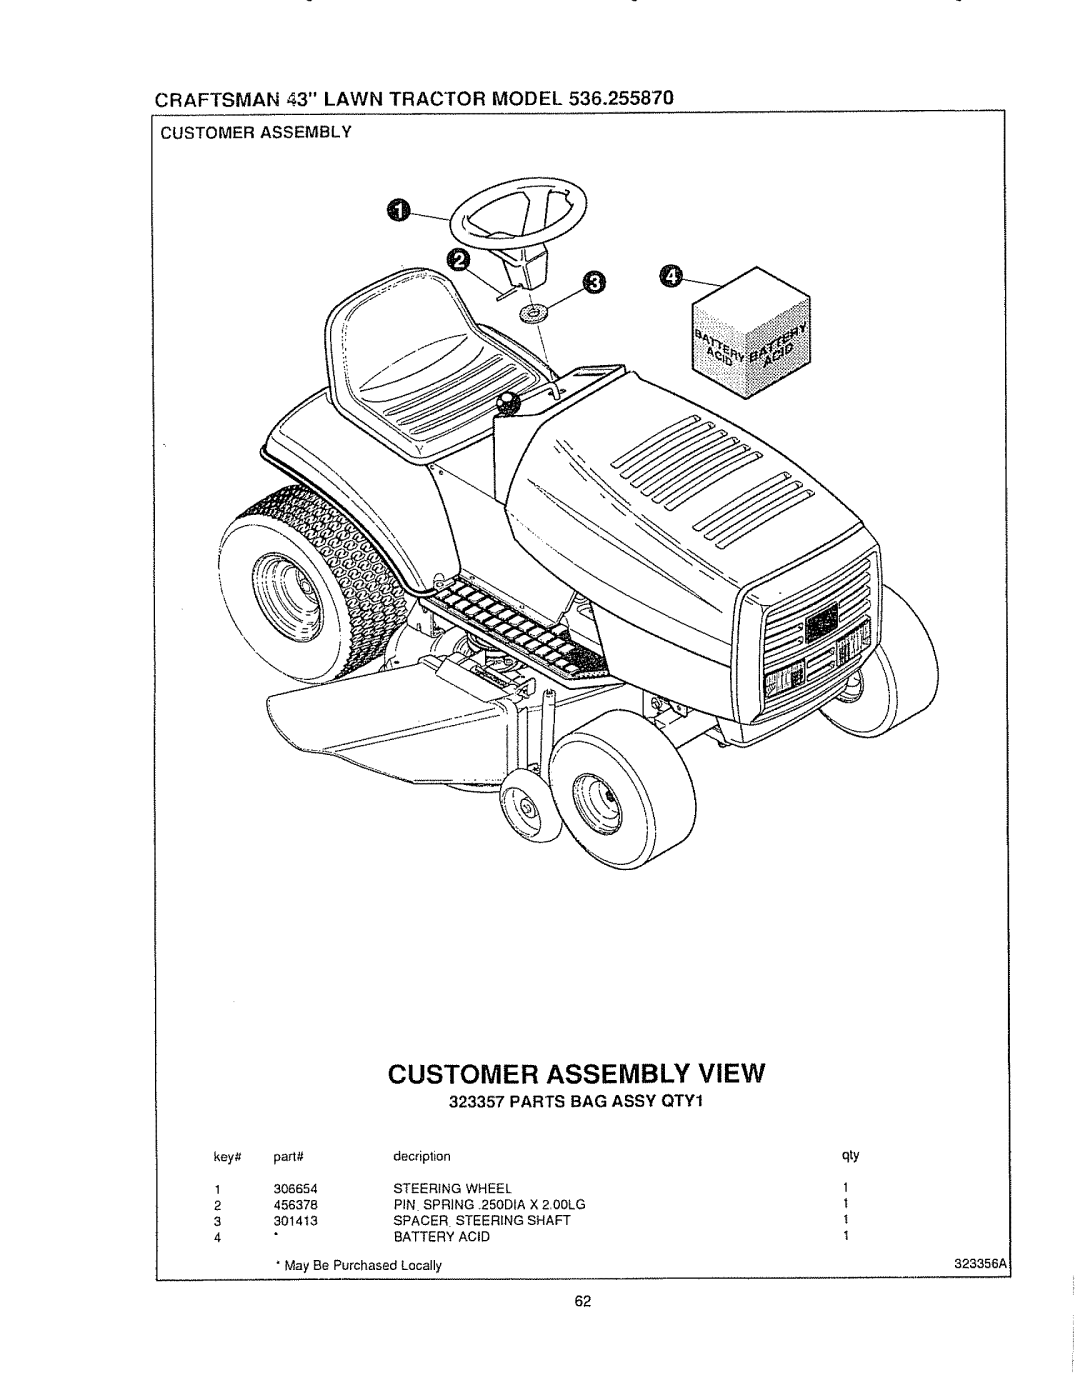 Sears 536.25587 owner manual Customer, Assembly, View 